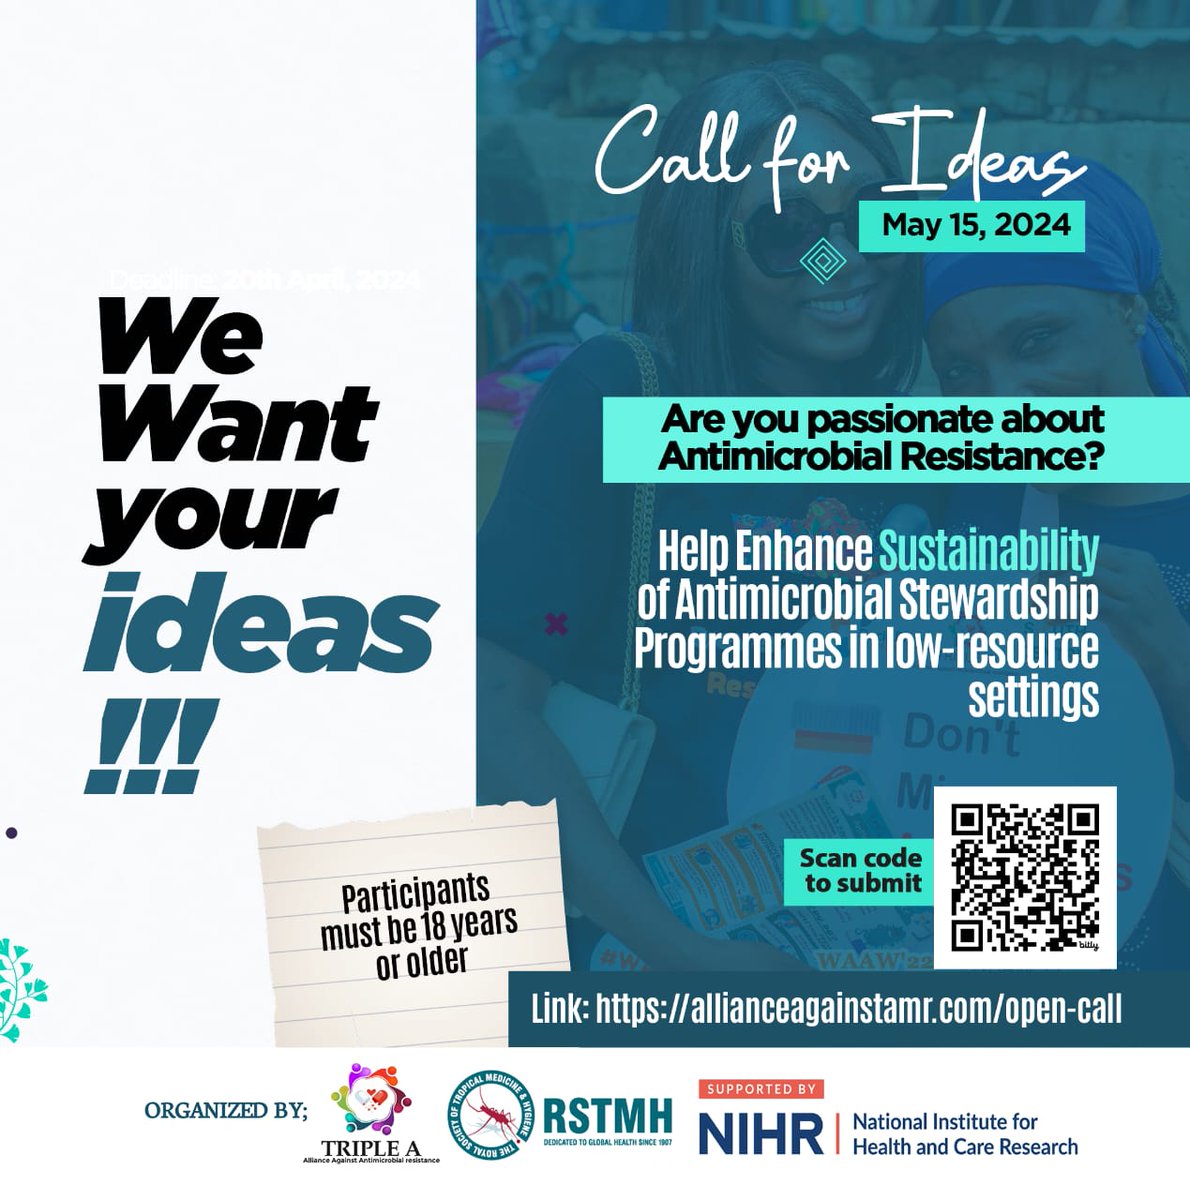 TOMORROW 15TH MAY IS THE DEADLINE!!! Do you have practical ideas for implementing effective antimicrobial stewardship programs in low-resource settings? Our open call to share ideas and practical tips on Antimicrobial stewardship Programmes (AMS) is now open! The Alliance Against